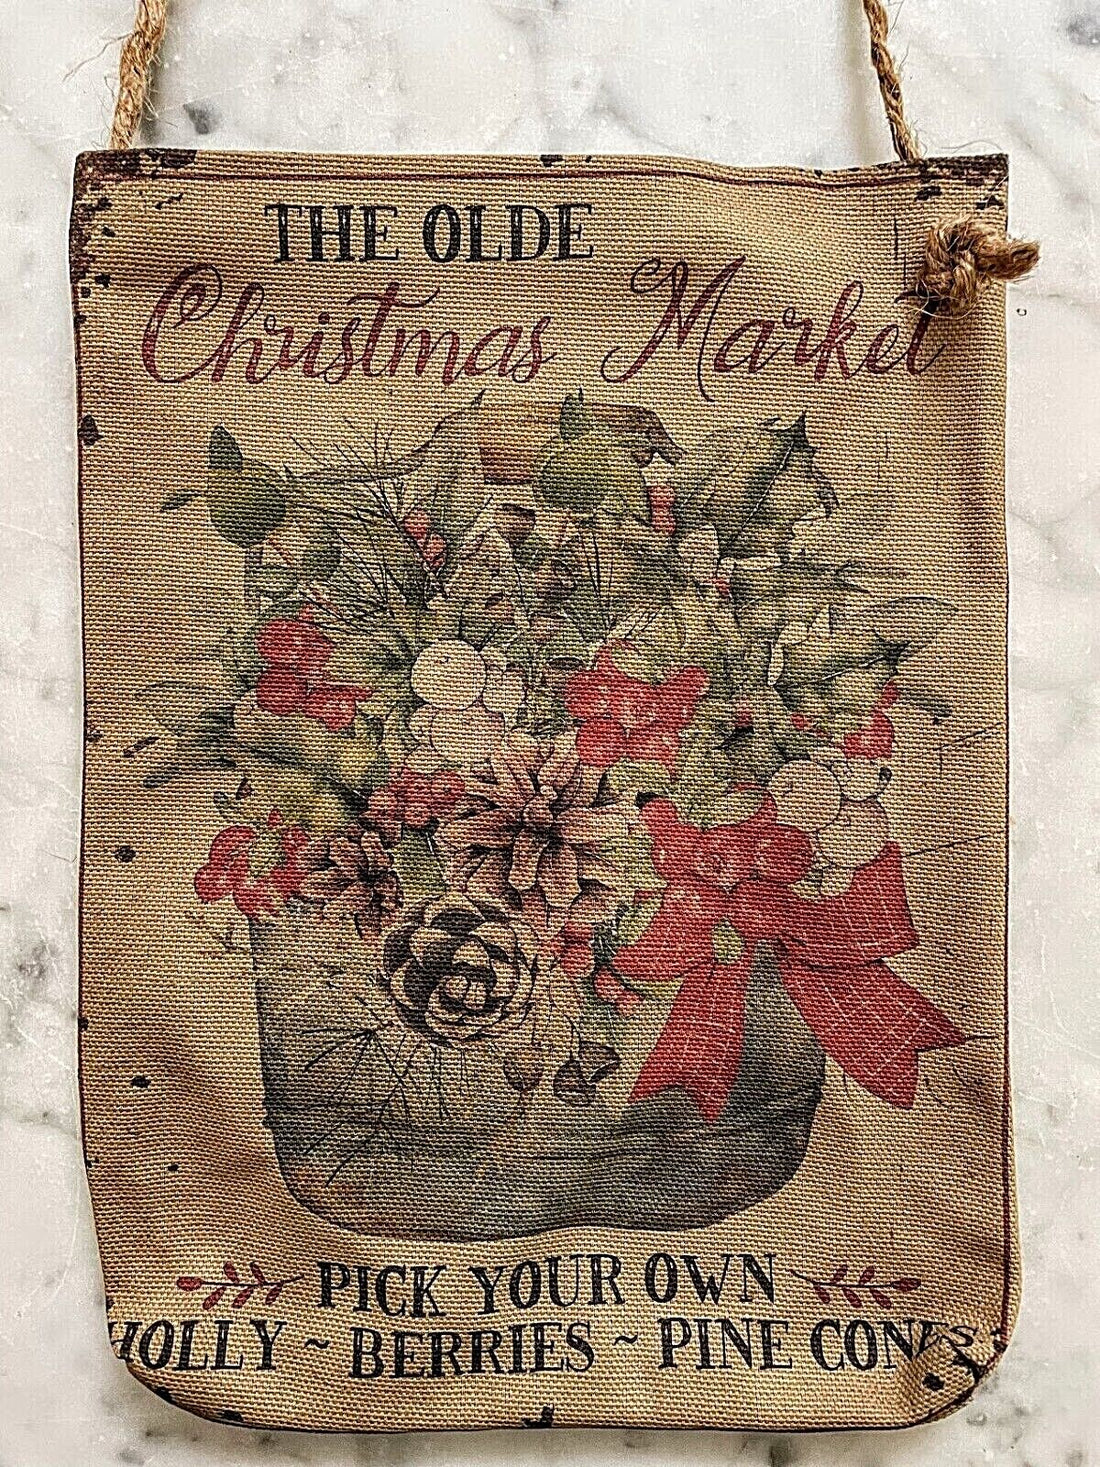 Handcrafted Primitive Retro look Hanging Olde Christmas Market Fabric pouch/Bag - The Primitive Pineapple Collection